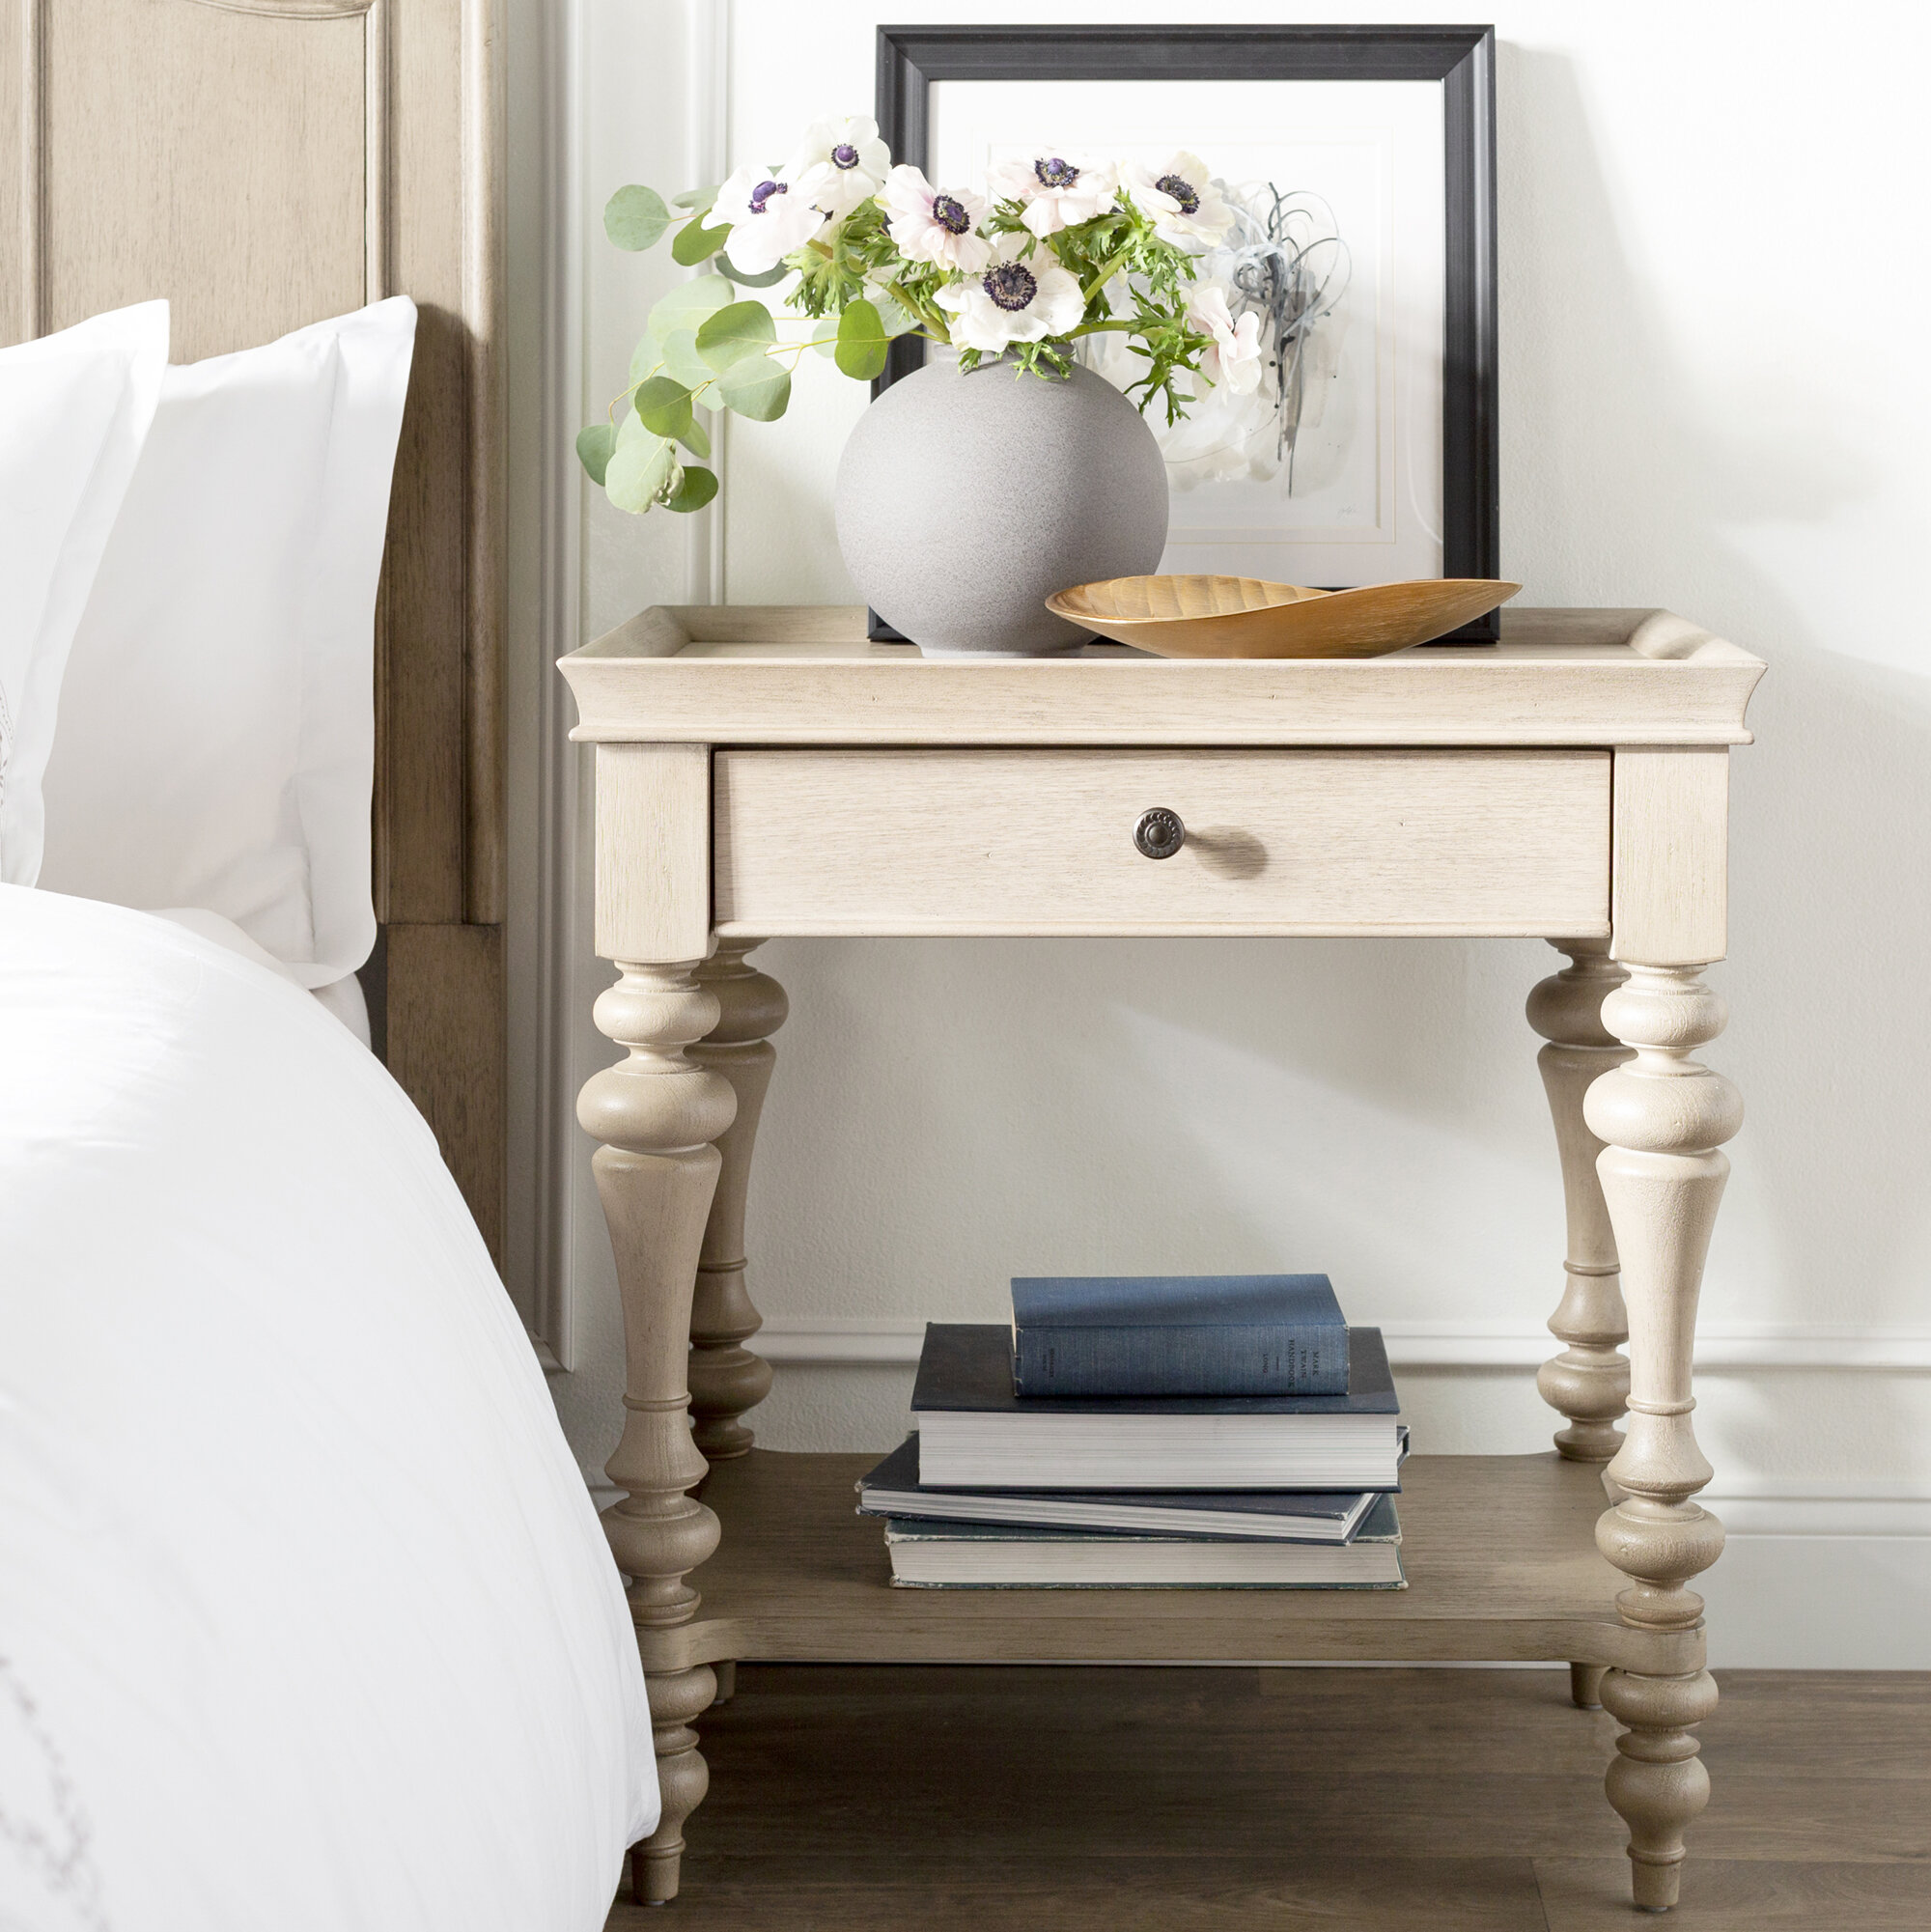  Kelly Clarkson Home Furnishings Collection 